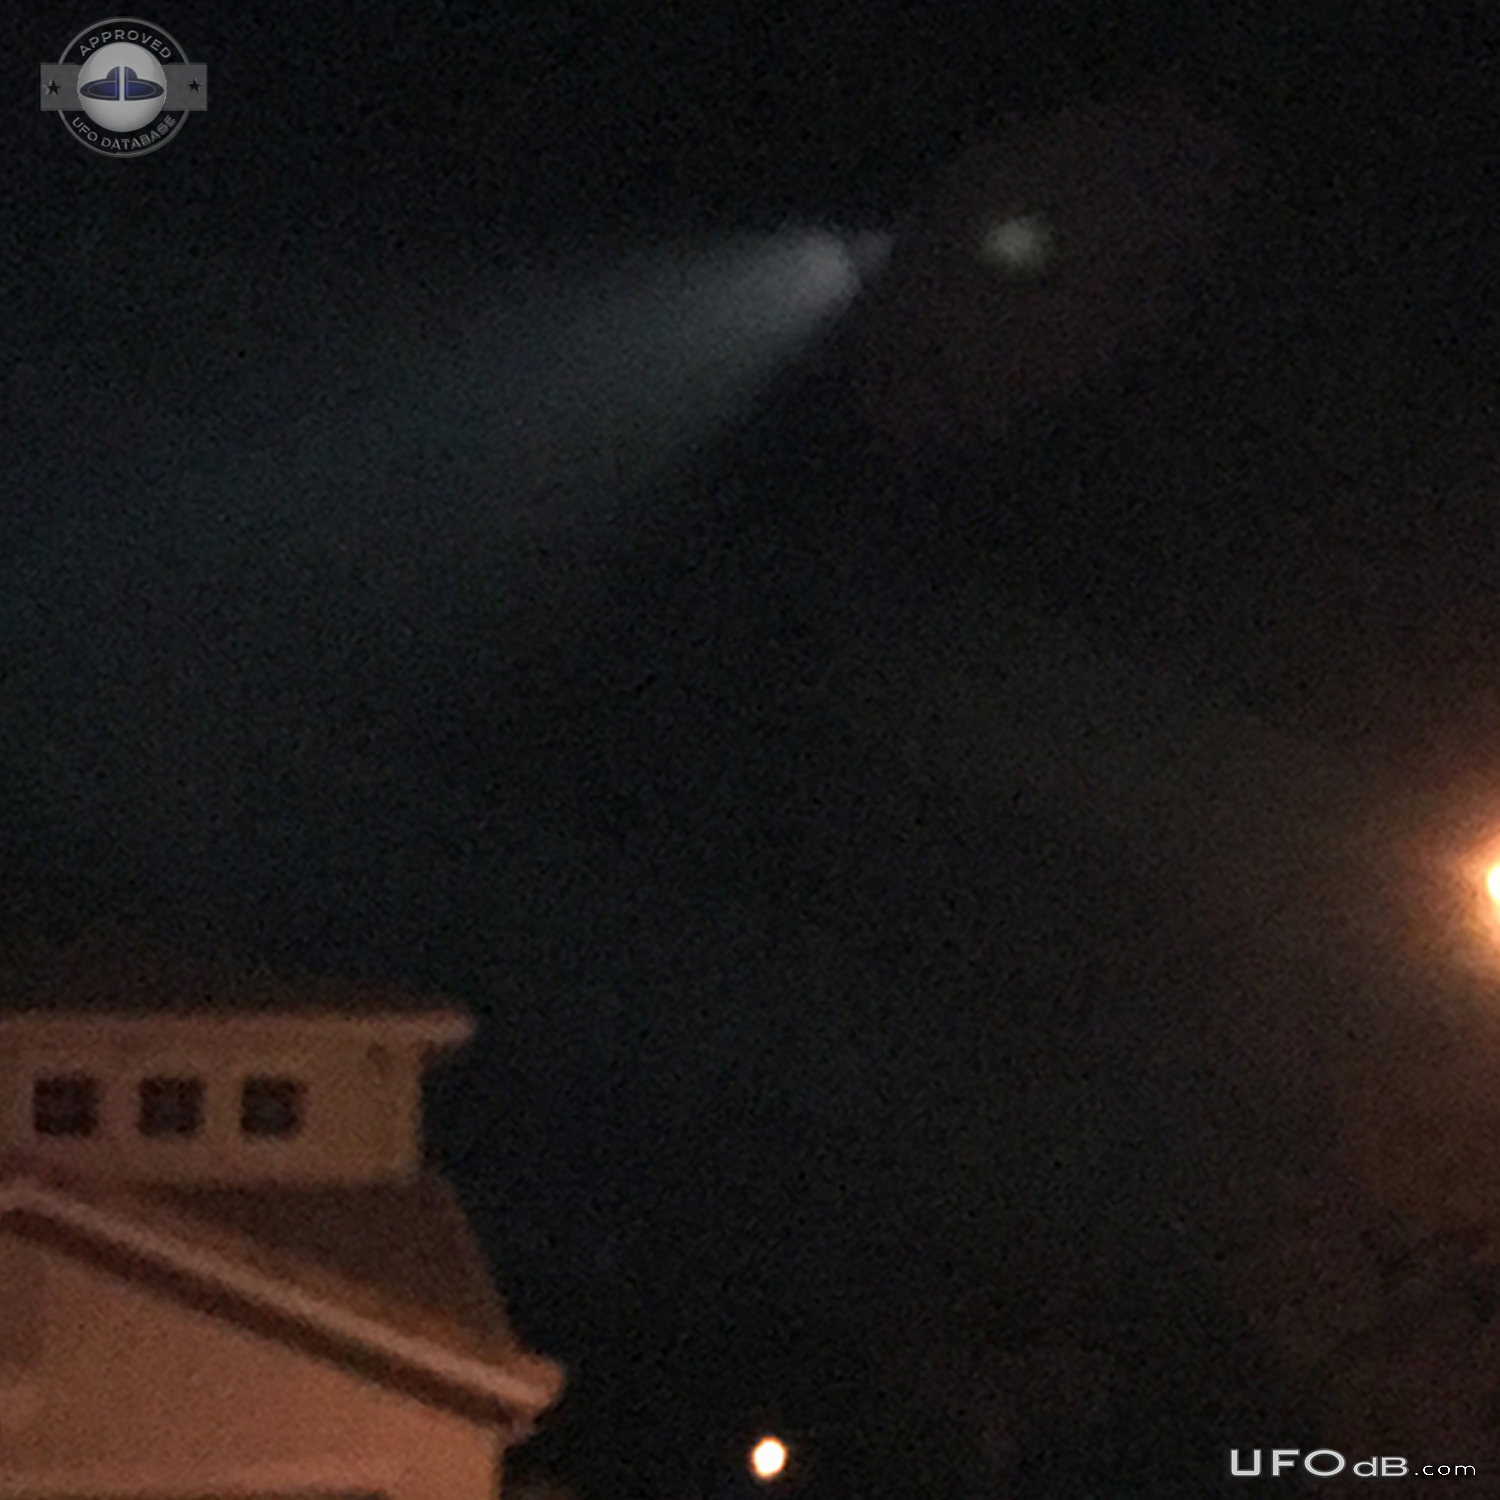 Coming out of my house saw UFO in the sky with a long beam of light -  UFO Picture #758-3